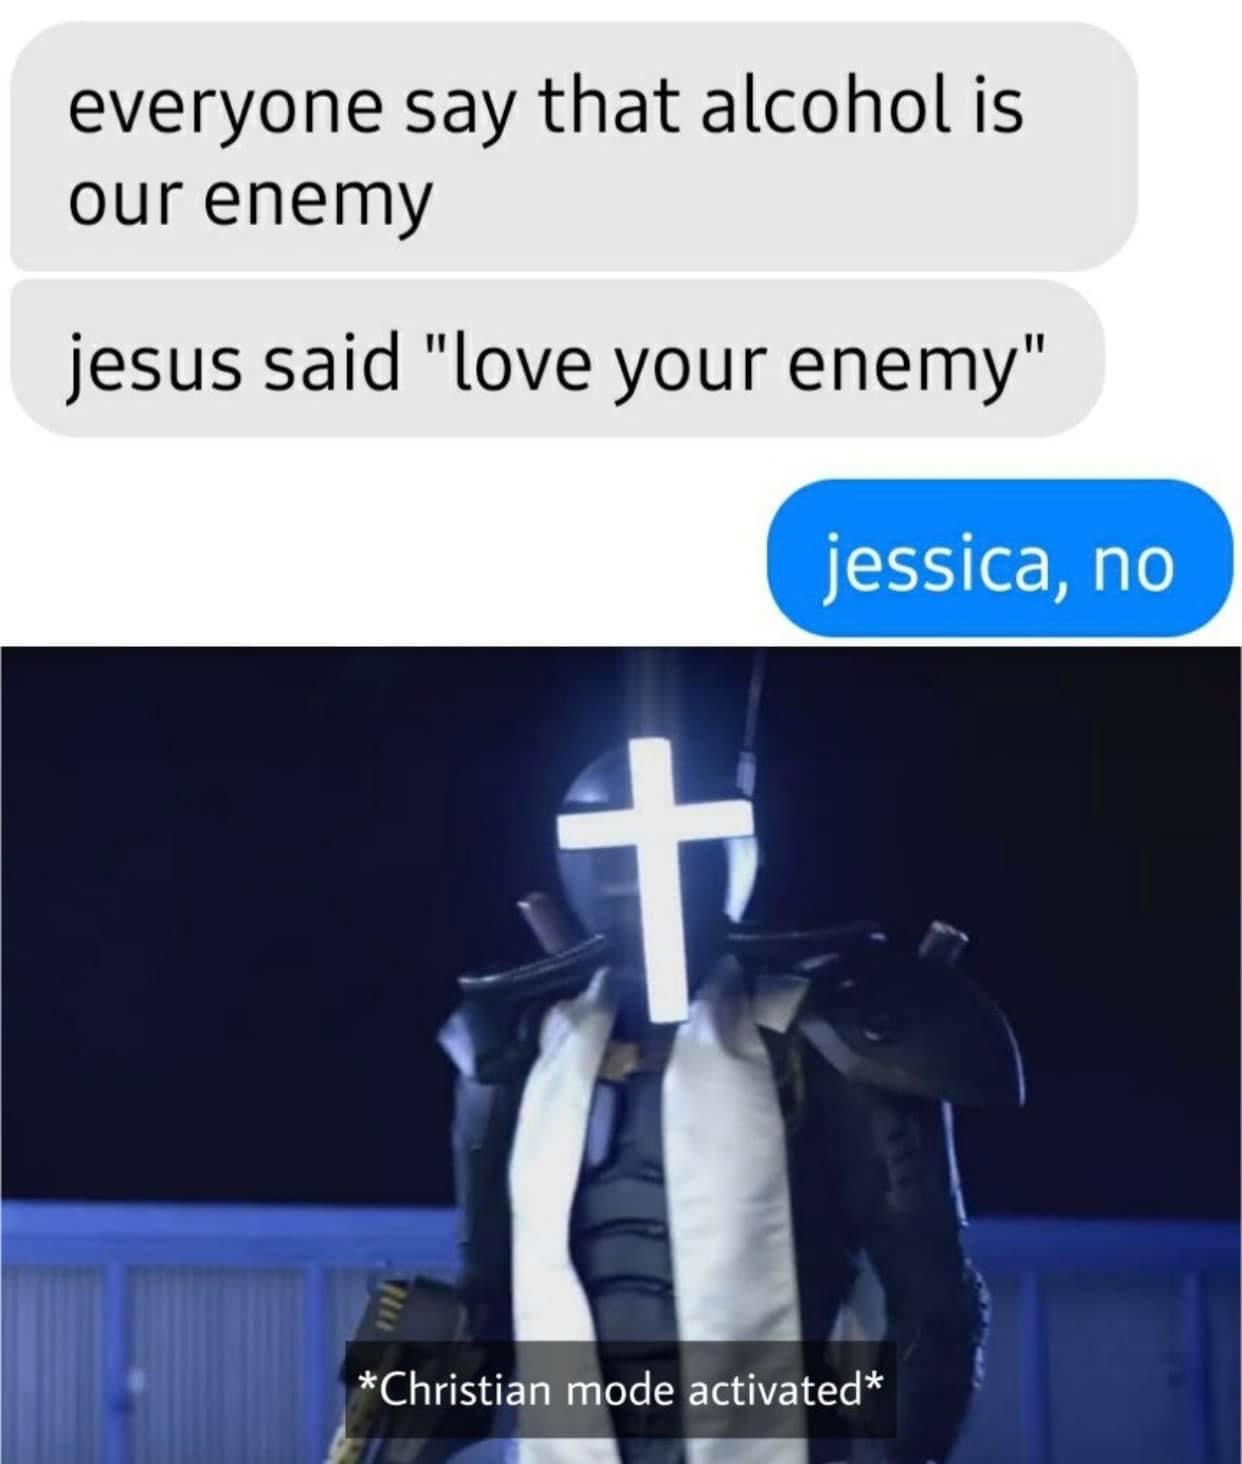 christian mode activated meme - everyone say that alcohol is our enemy jesus said "love your enemy" jessica, no Christian mode activated